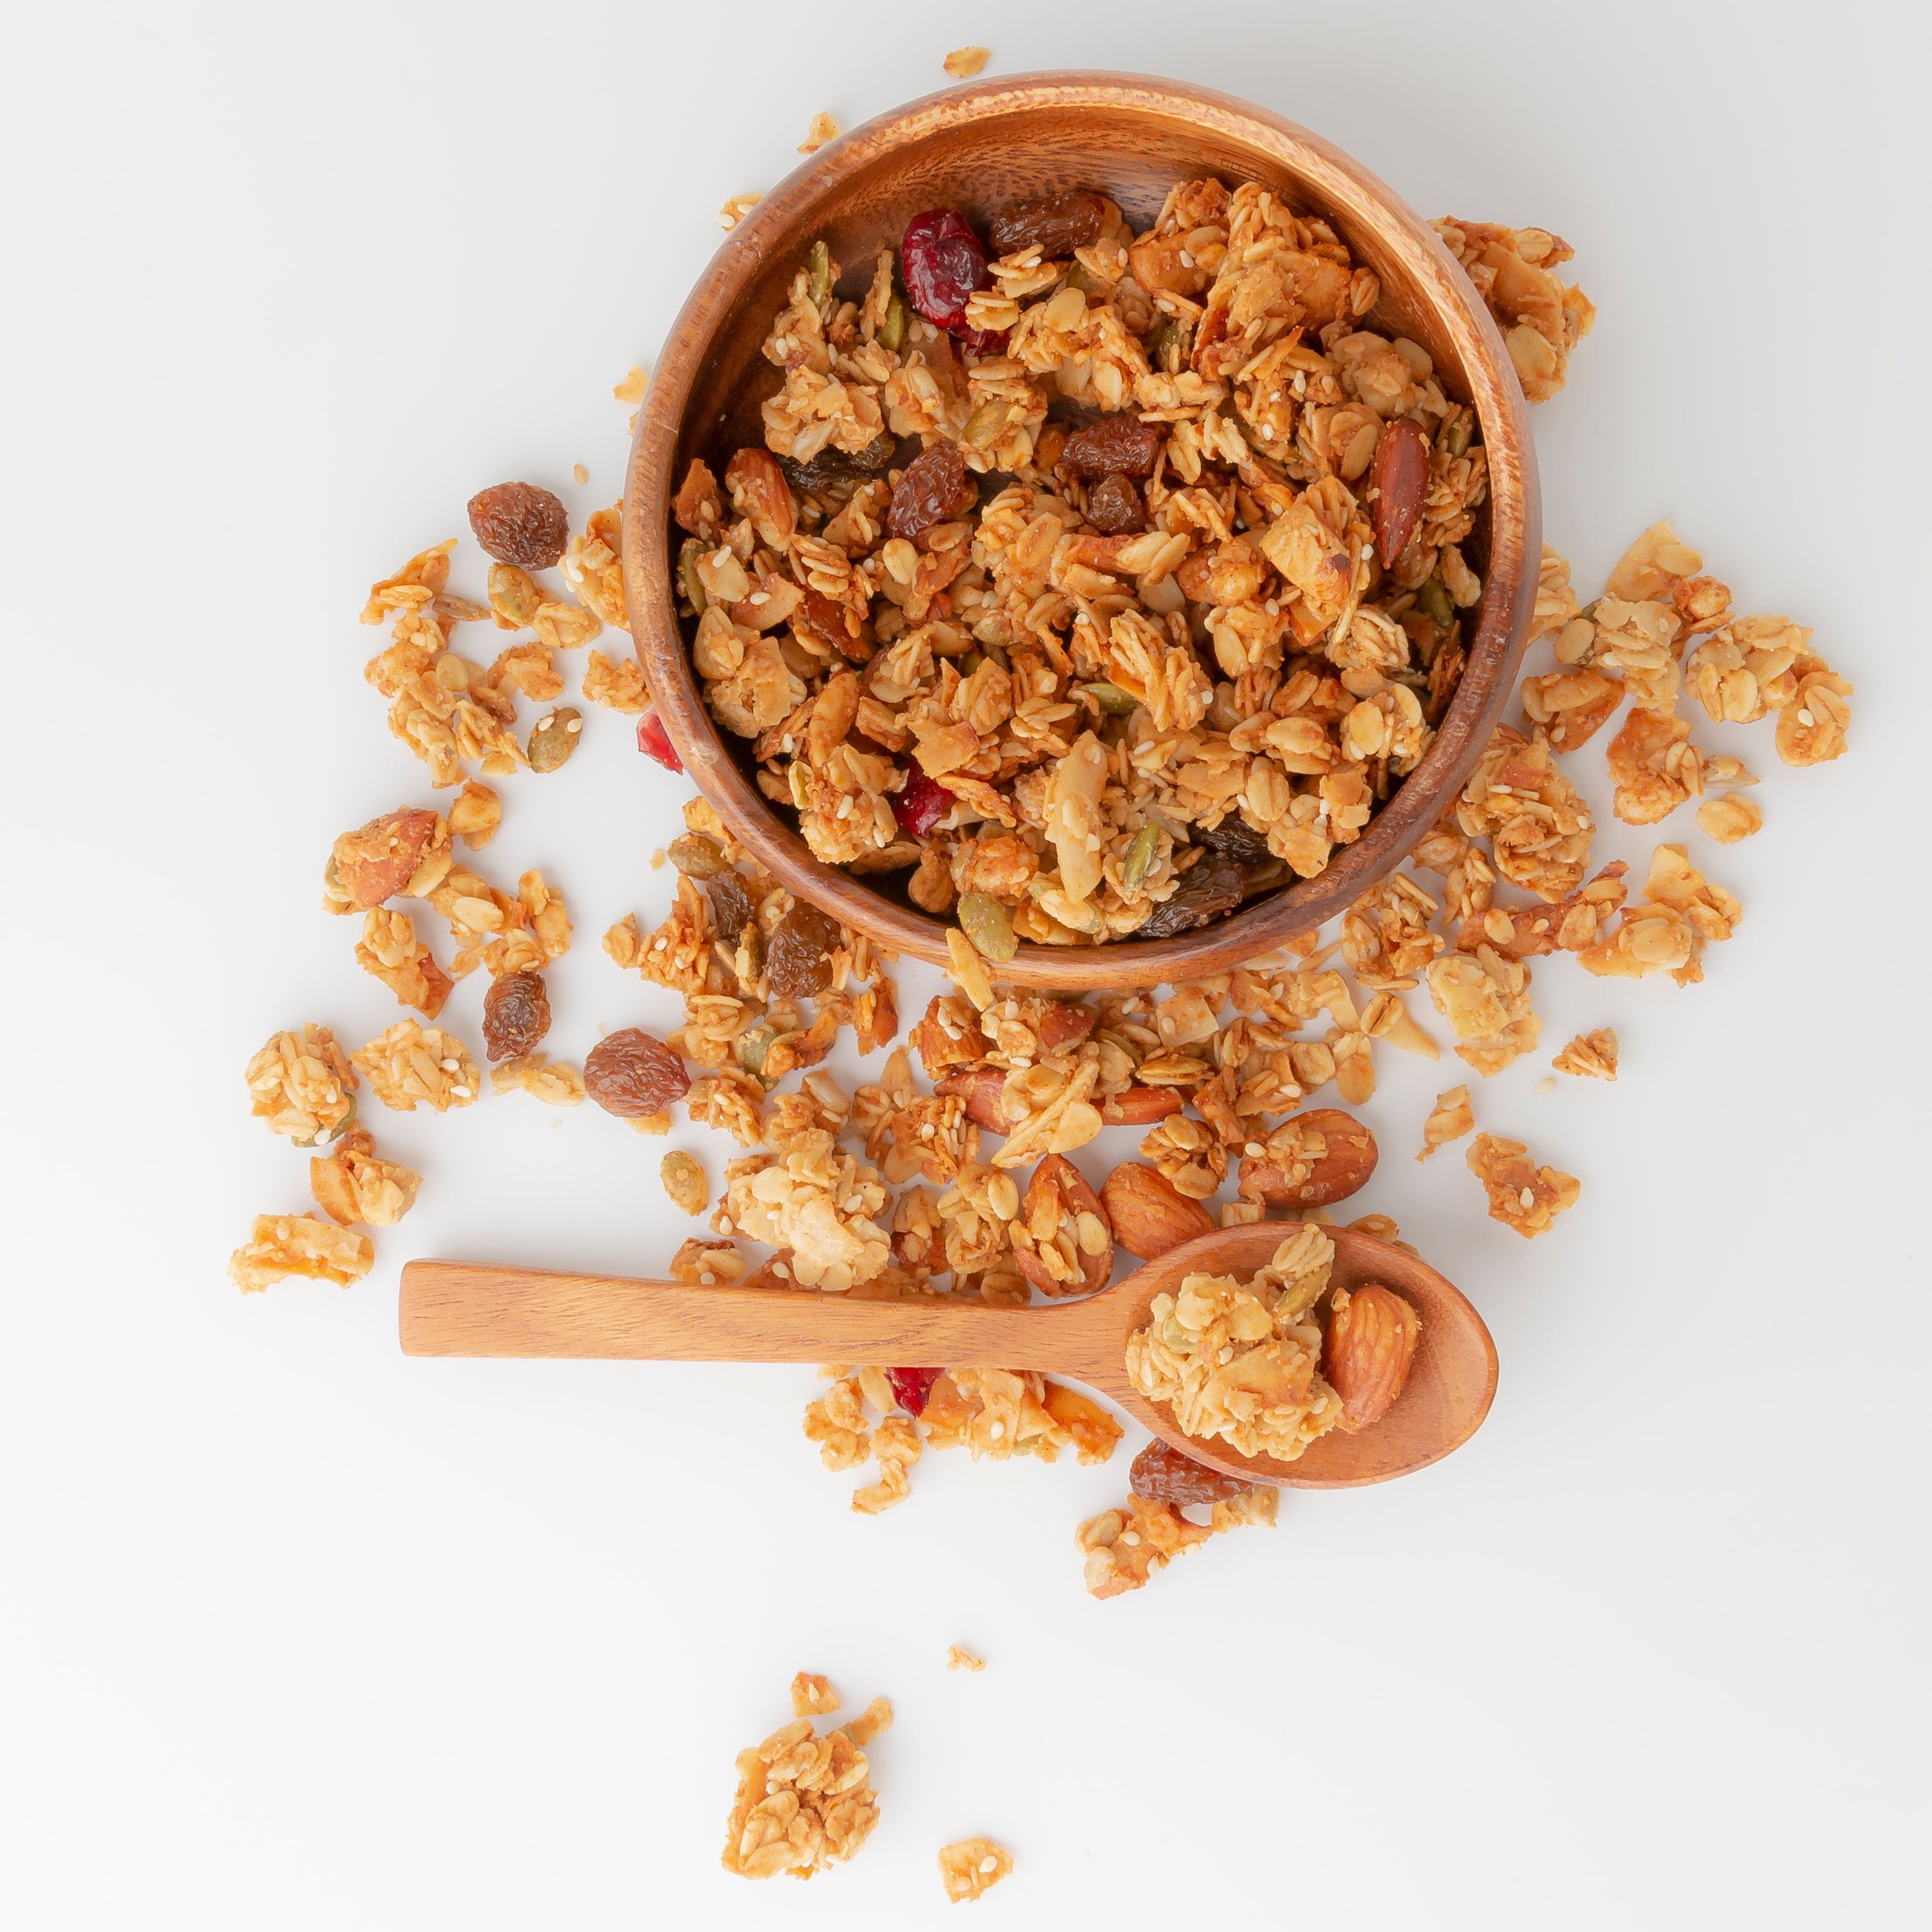 An image of 100% Natural, Vegan Fruit and Nut Granola (Cereals) - Naked Foods